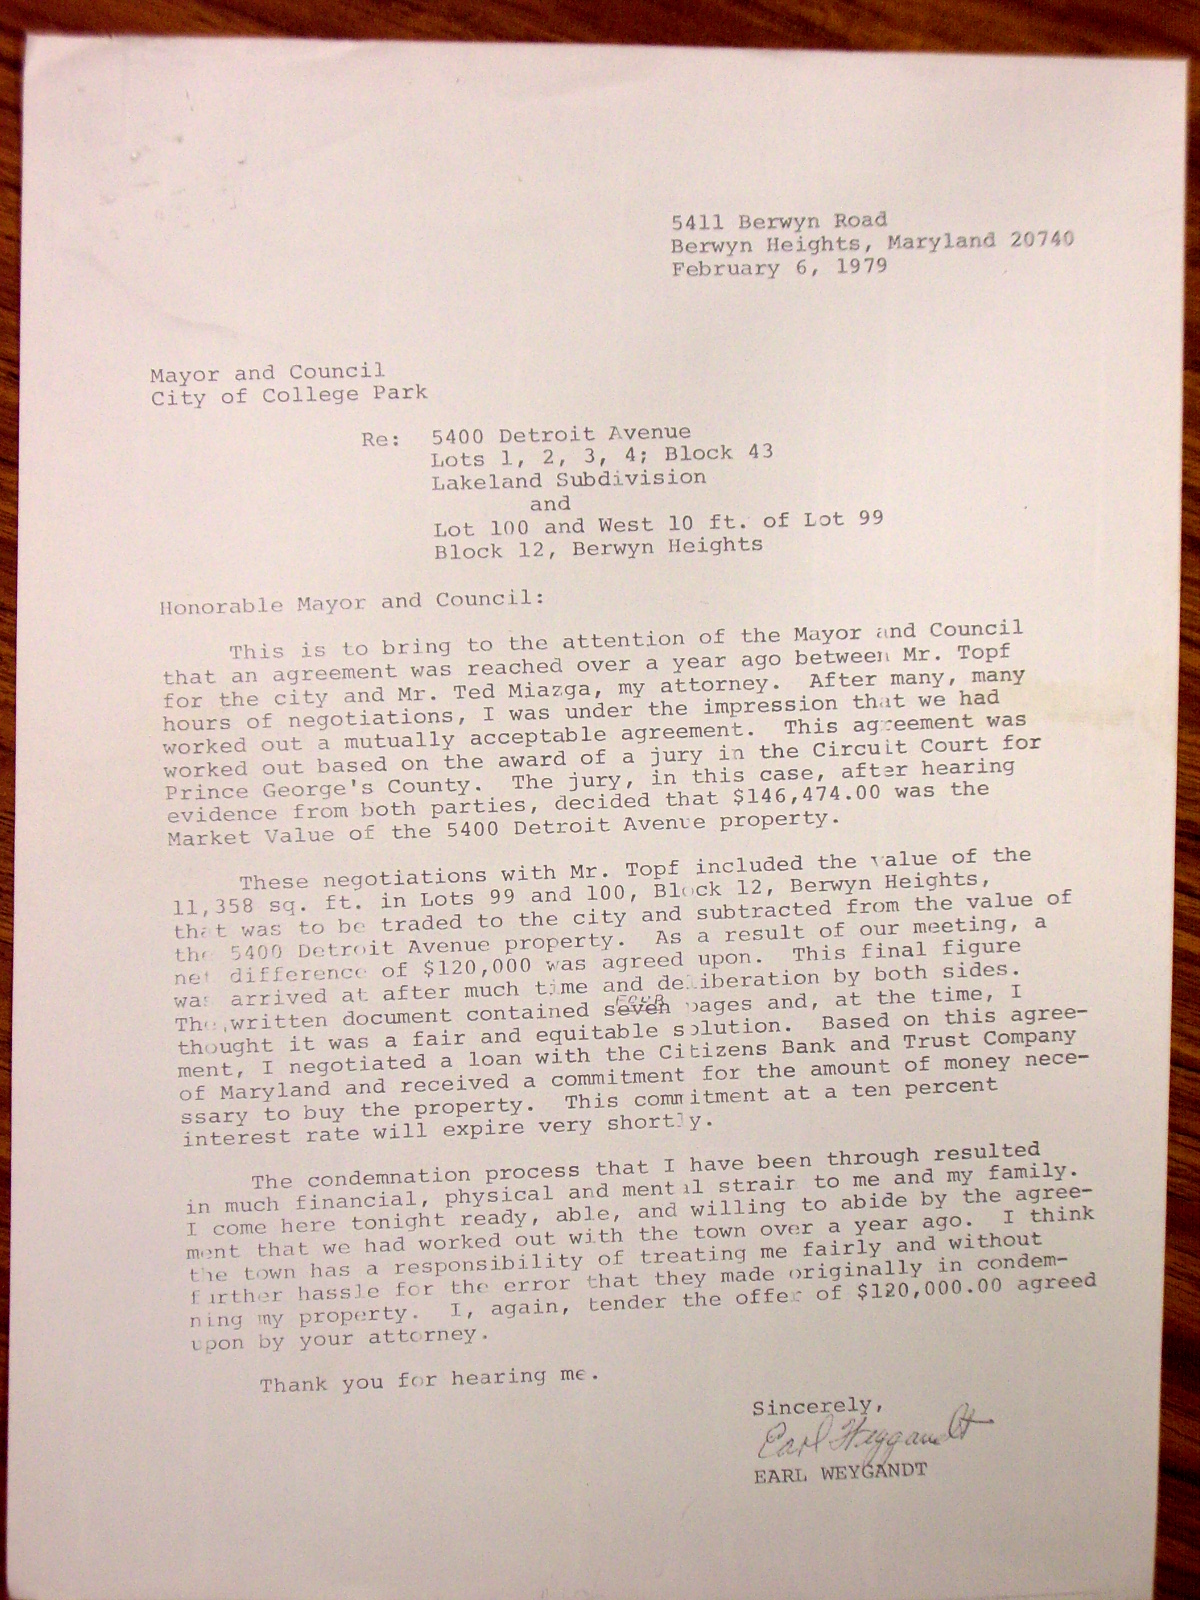 Letter from Earl Weygandt